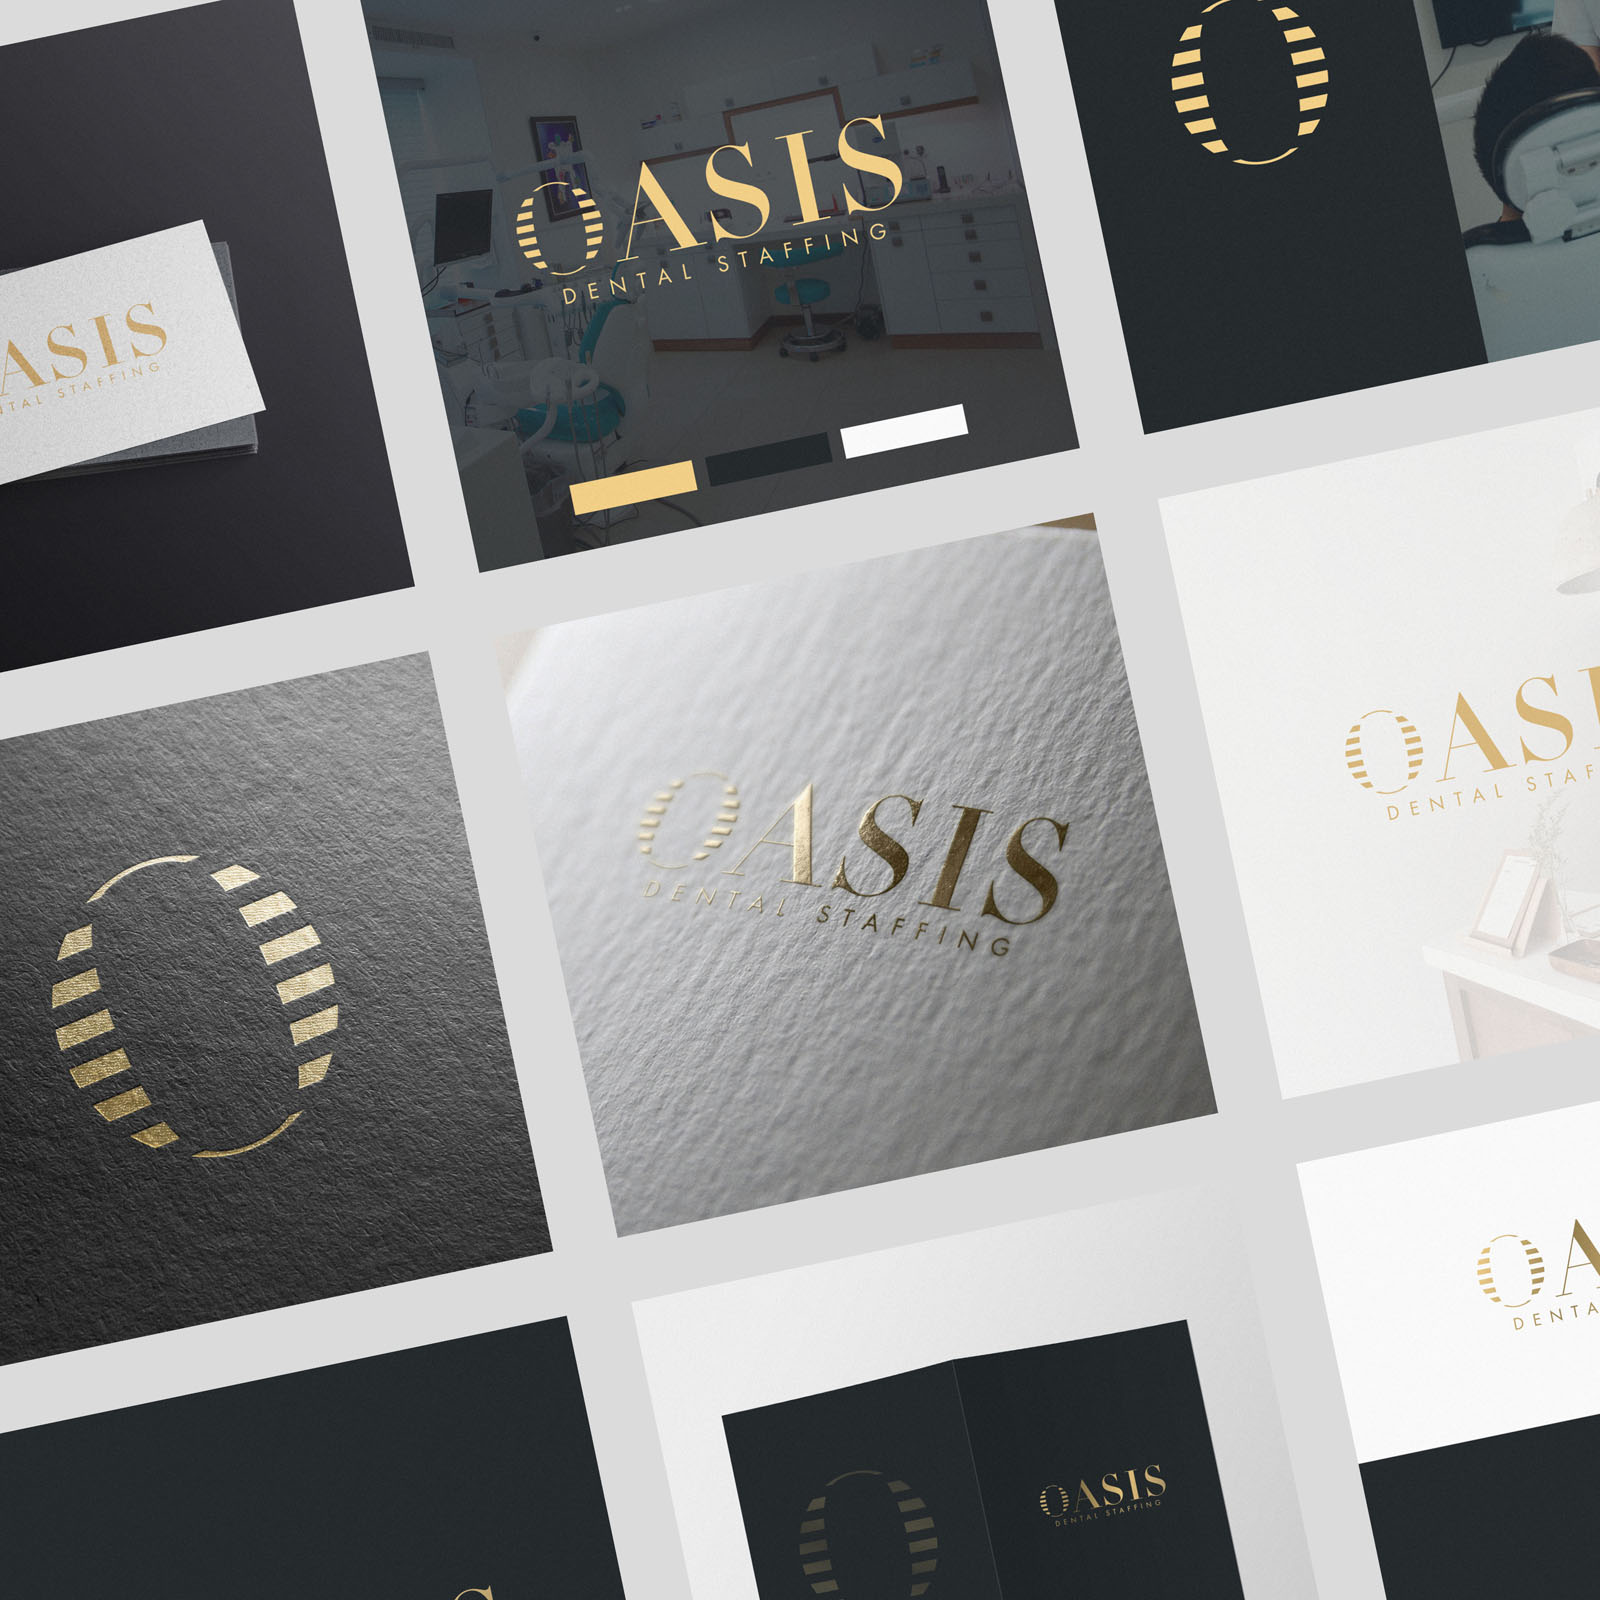 Dental - Professional Branding and Identity Design Project London